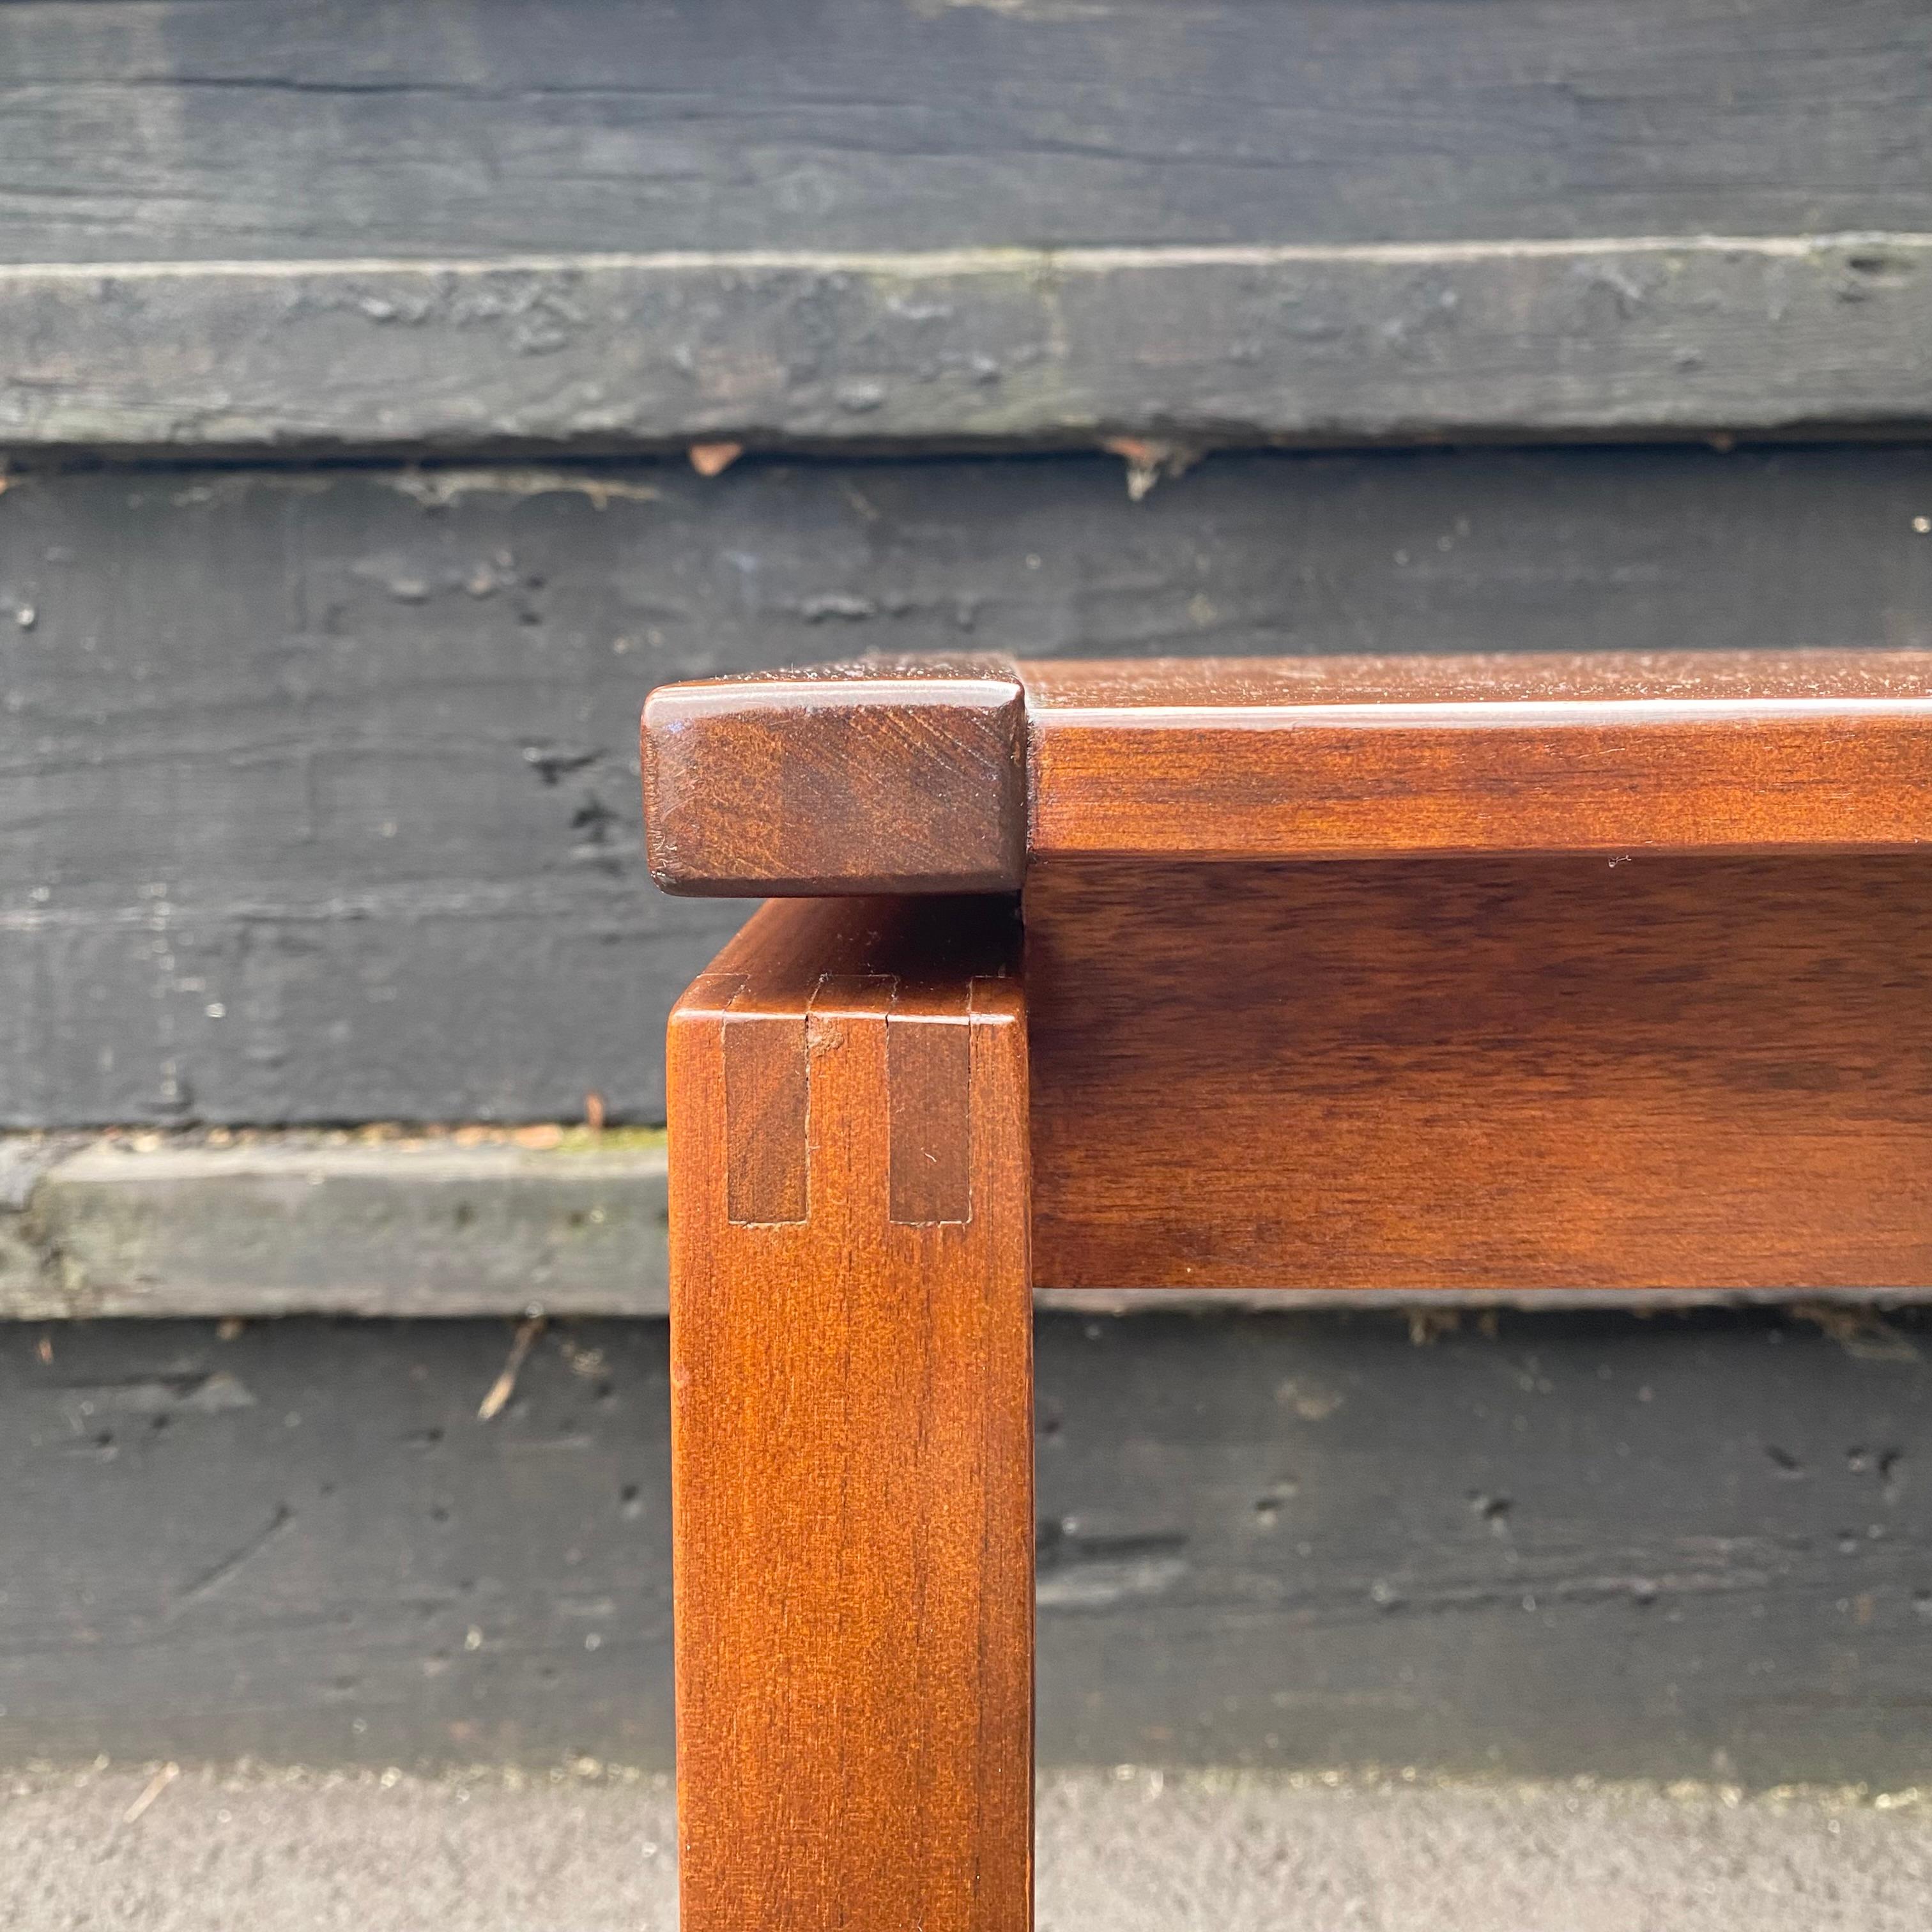 This is a very nice walnut sofa or console table designed by Jens Risom for his company, circa 1960s. It would be perfect as a tv stand or for behind the sofa.

Condition: This piece shows wear. I cleaned and polished it and it cleaned up really